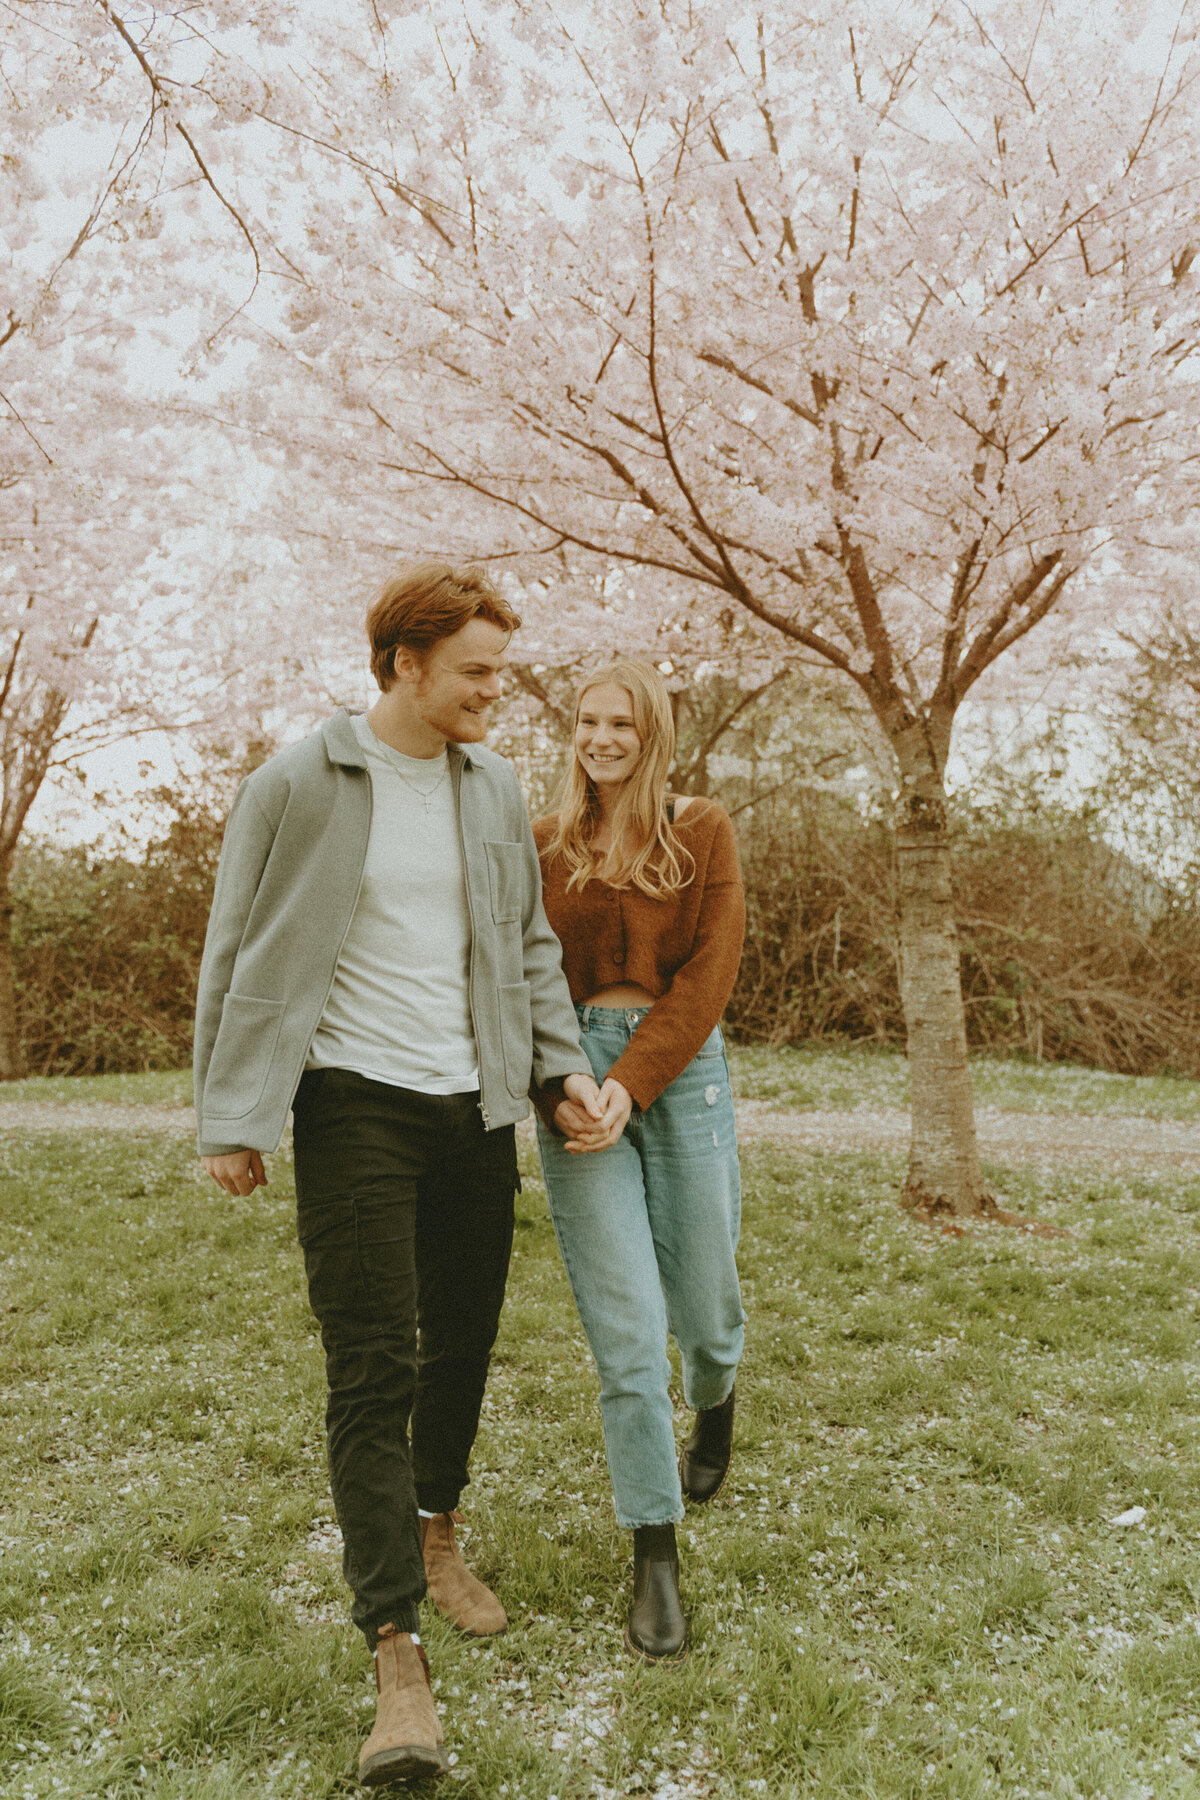 photo of guy and girl walking hand in hand in front of cherry blossom trees